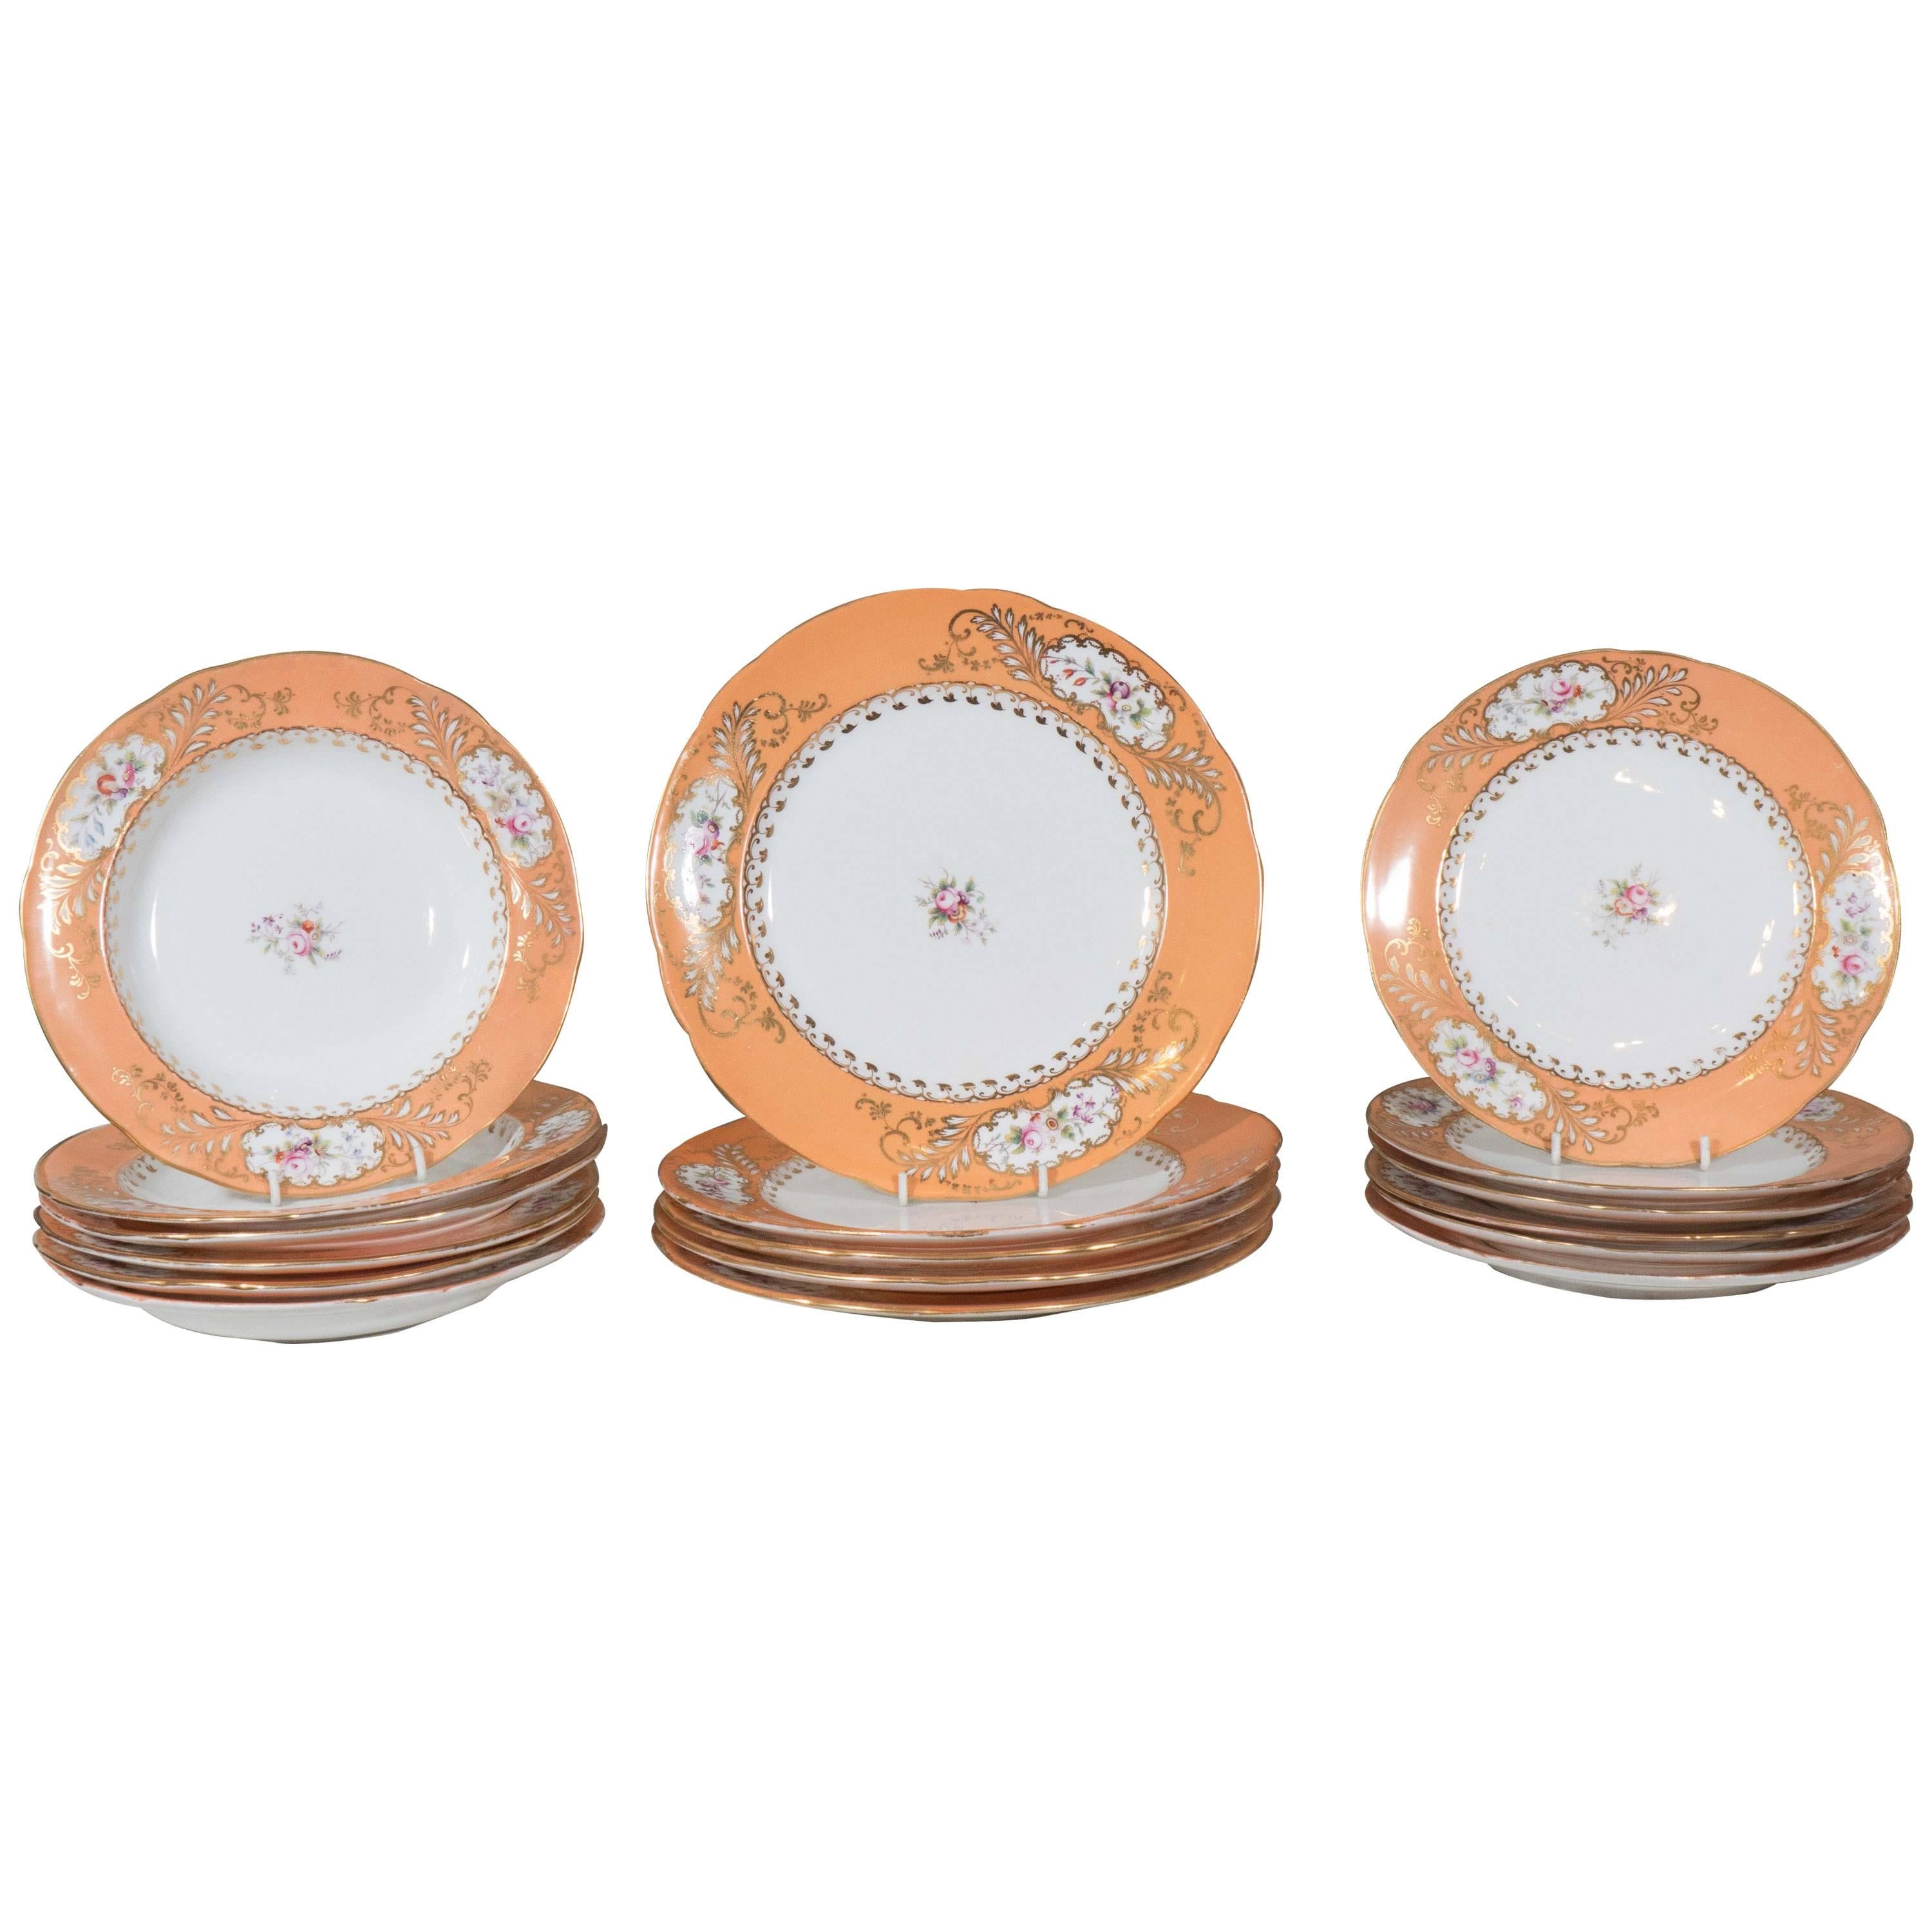 Antique English Porcelain Dishes with Wide Orange Borders